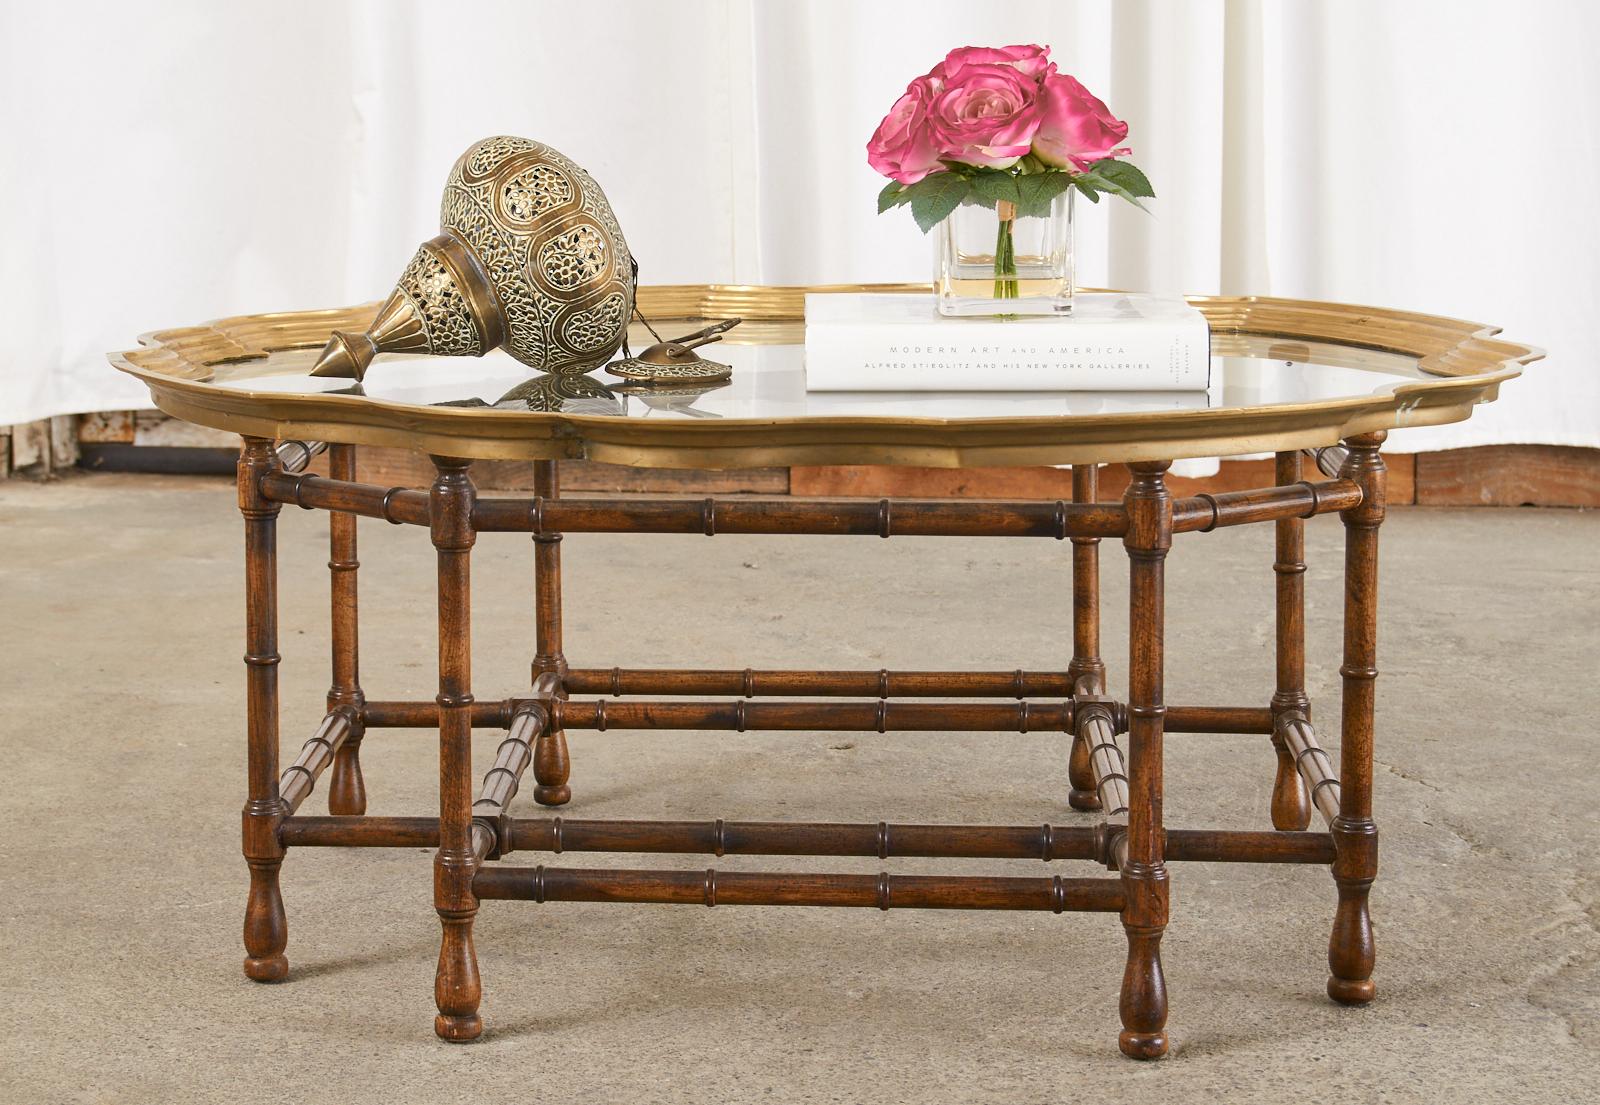 Hollywood regency brass and glass tray top coffee or cocktail table with dramatic scalloped edges framing the pane of glass. The mid-century modern table has a geometric octagonal shaped faux bamboo wood base with a beautiful open design. The tray